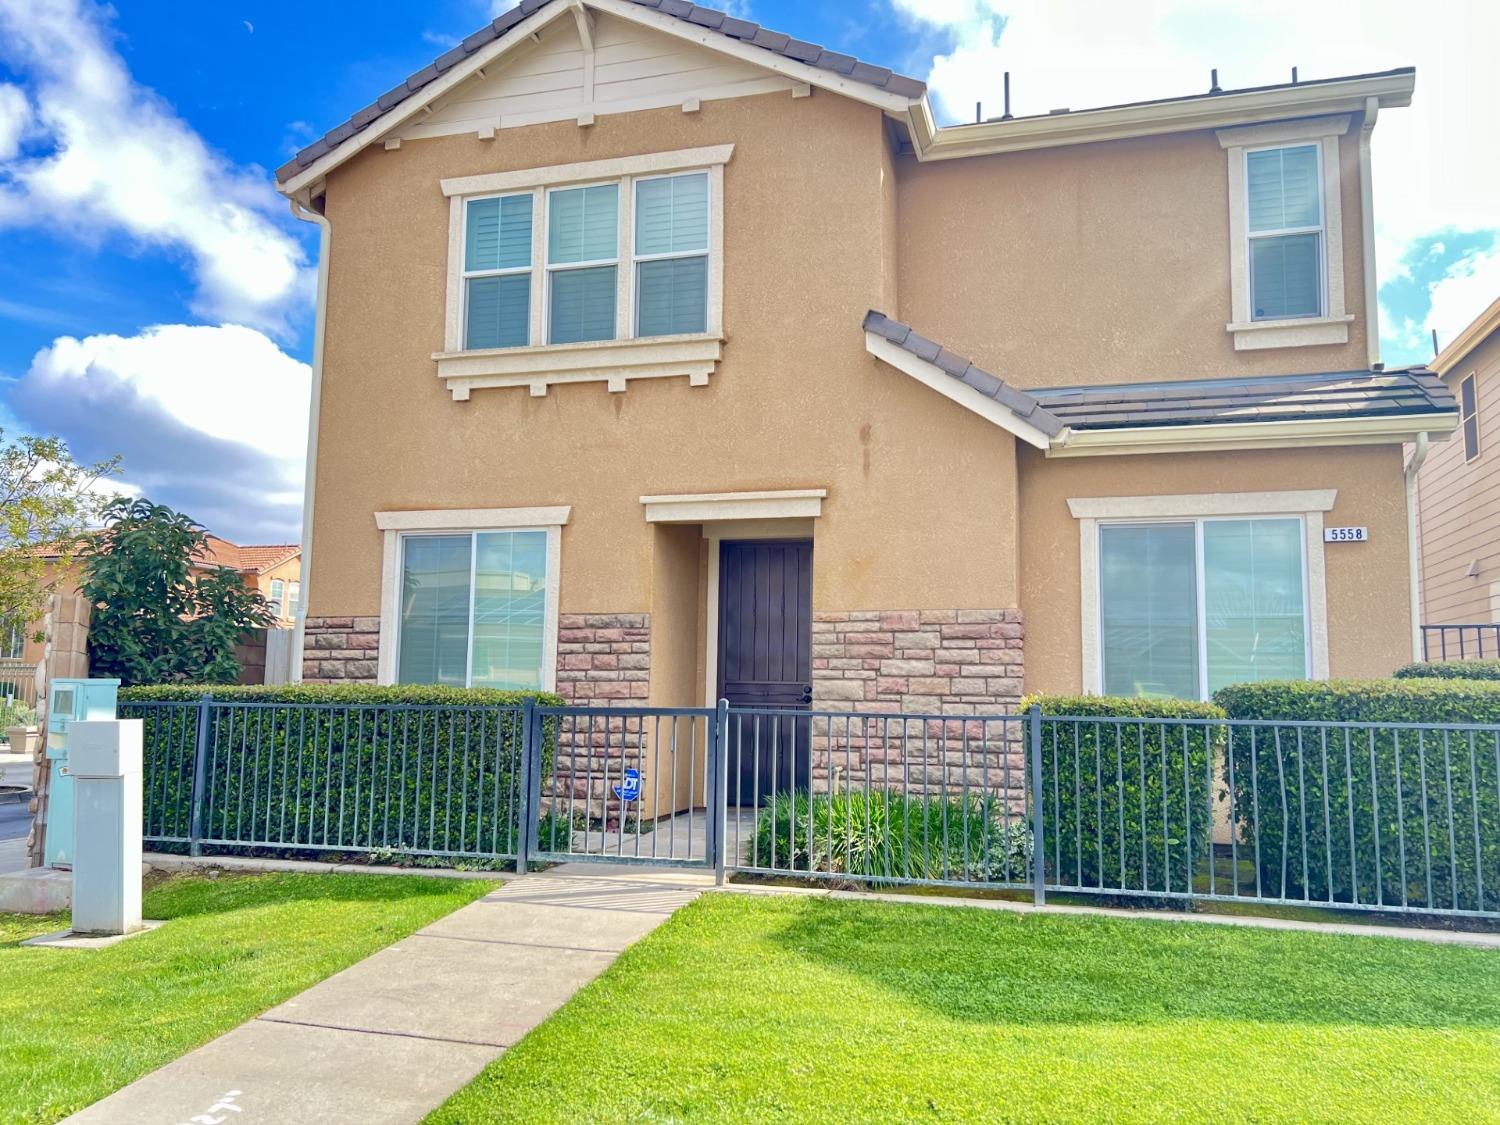 Photo of 5558 N Salinas Ave in Fresno, CA